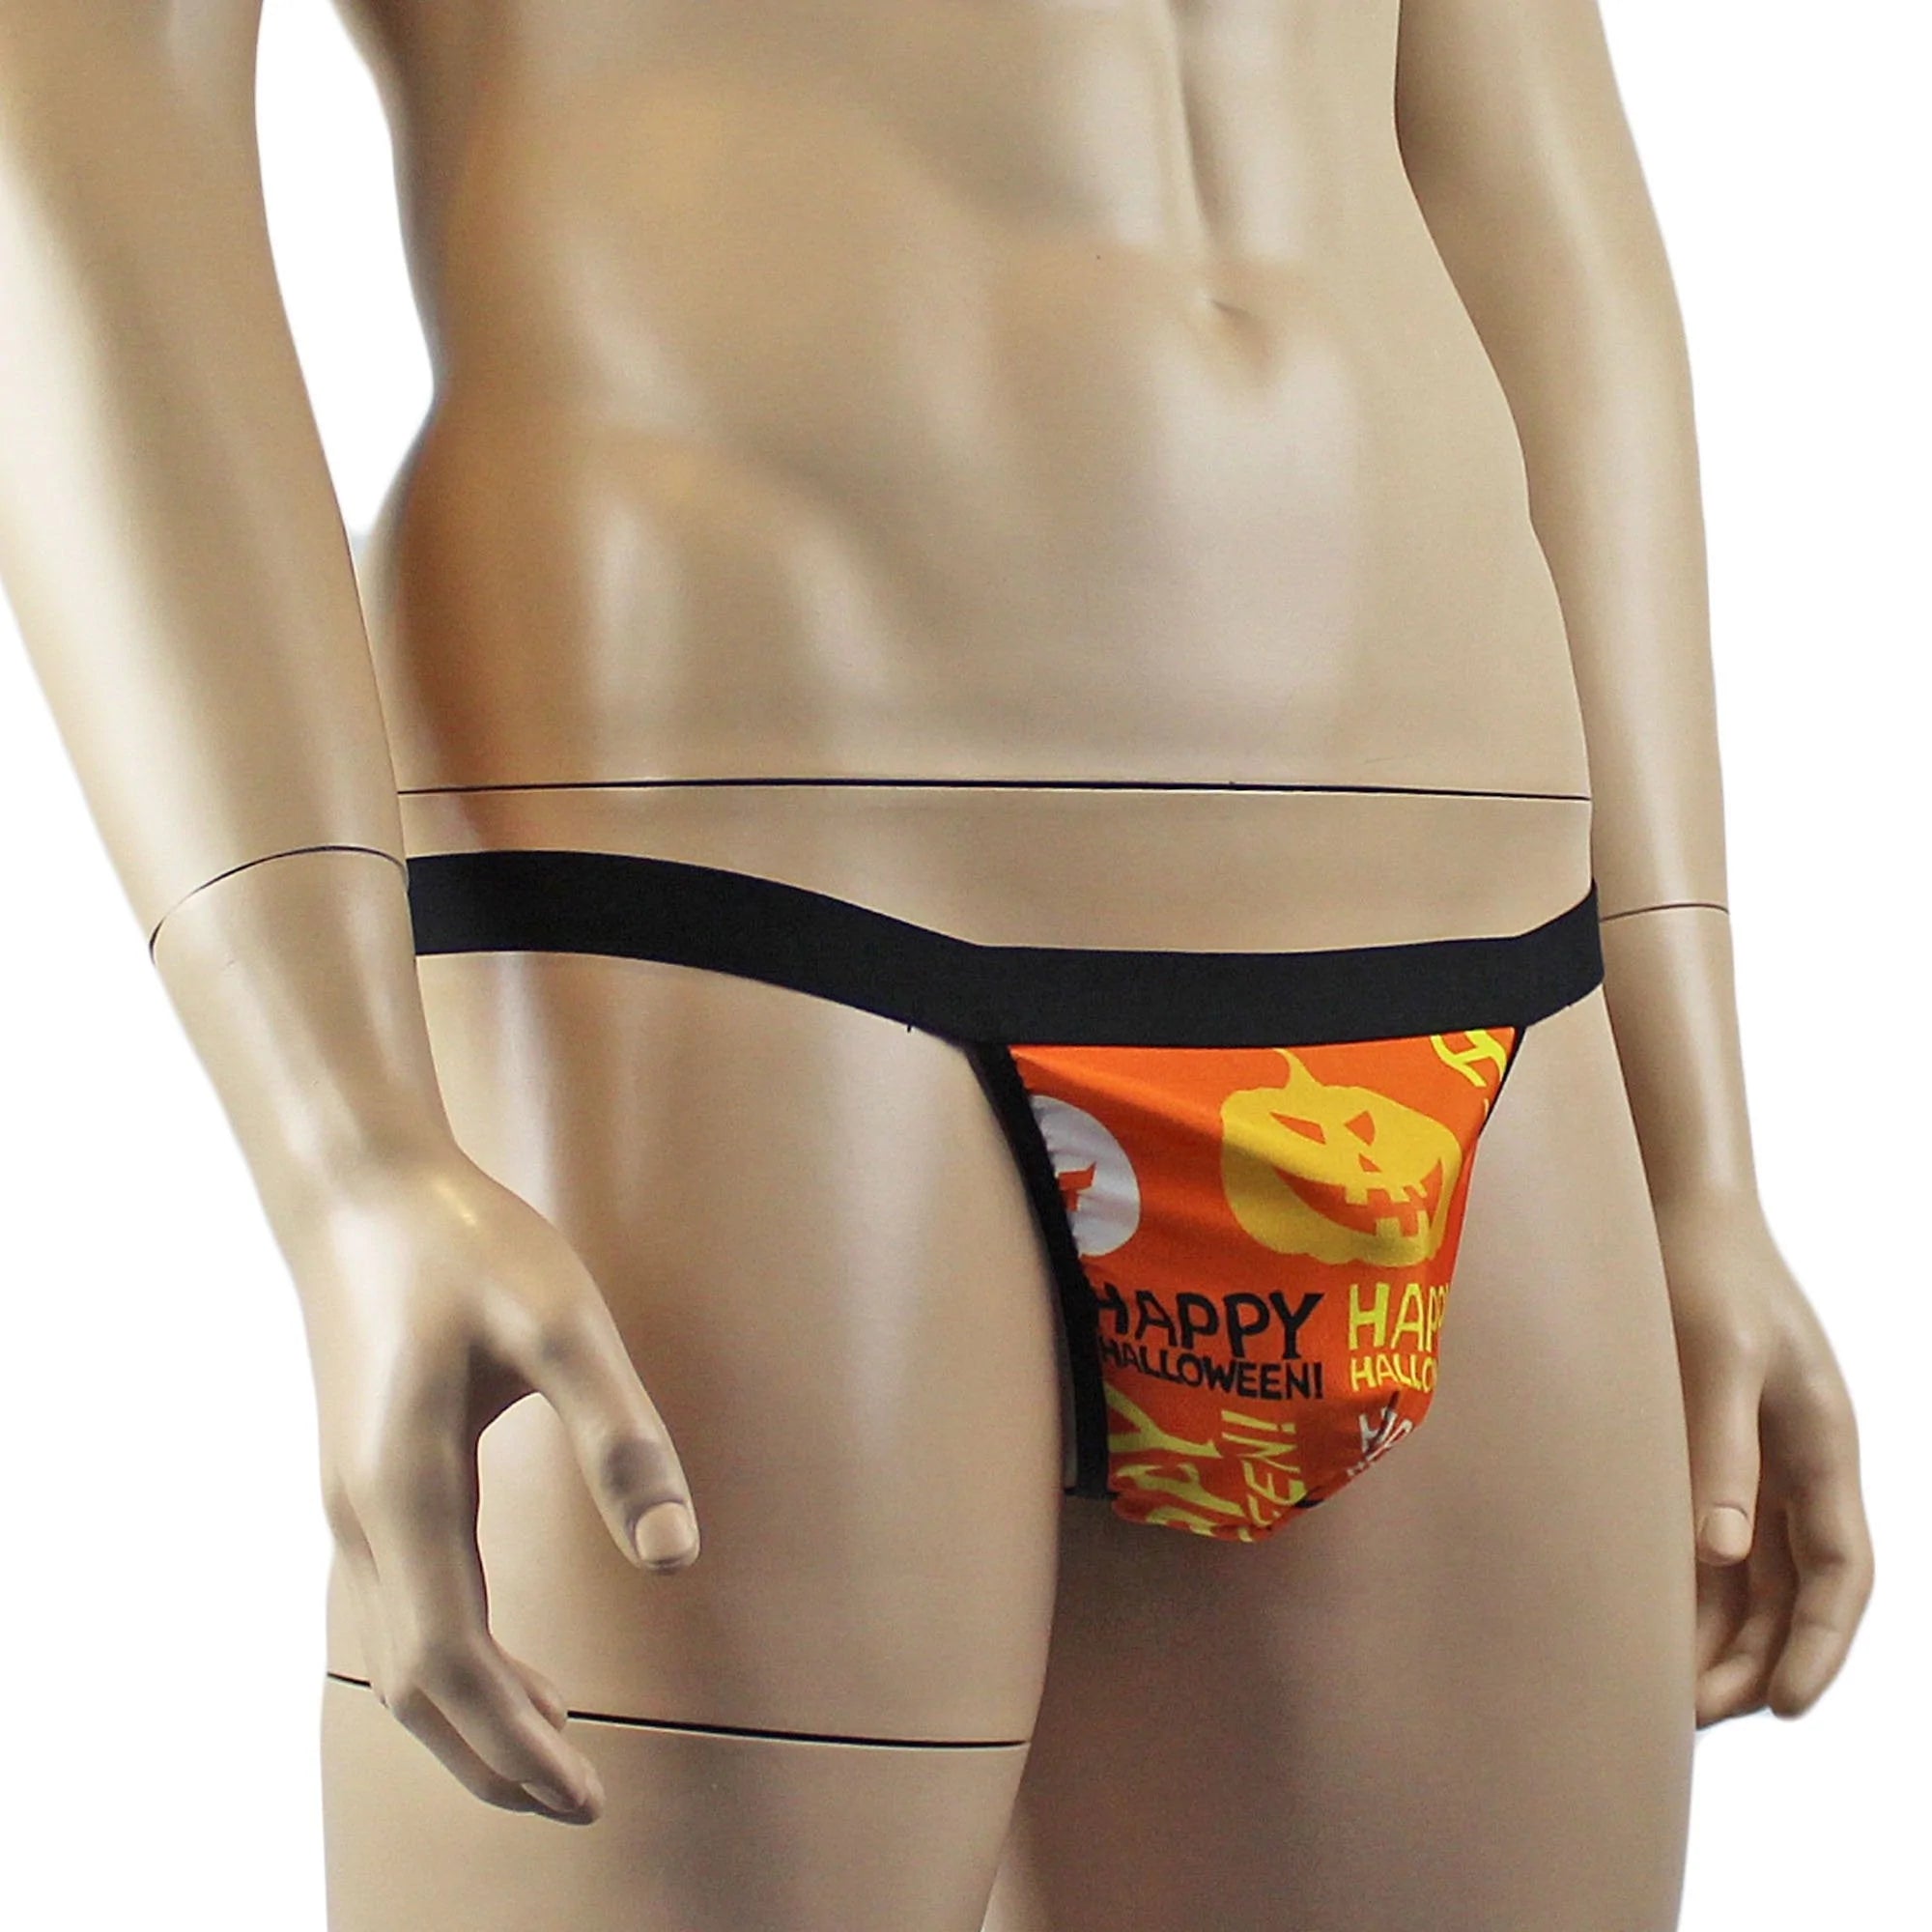 SALE - Mens Happy Halloween Pouch G string Thong with Elastic Band